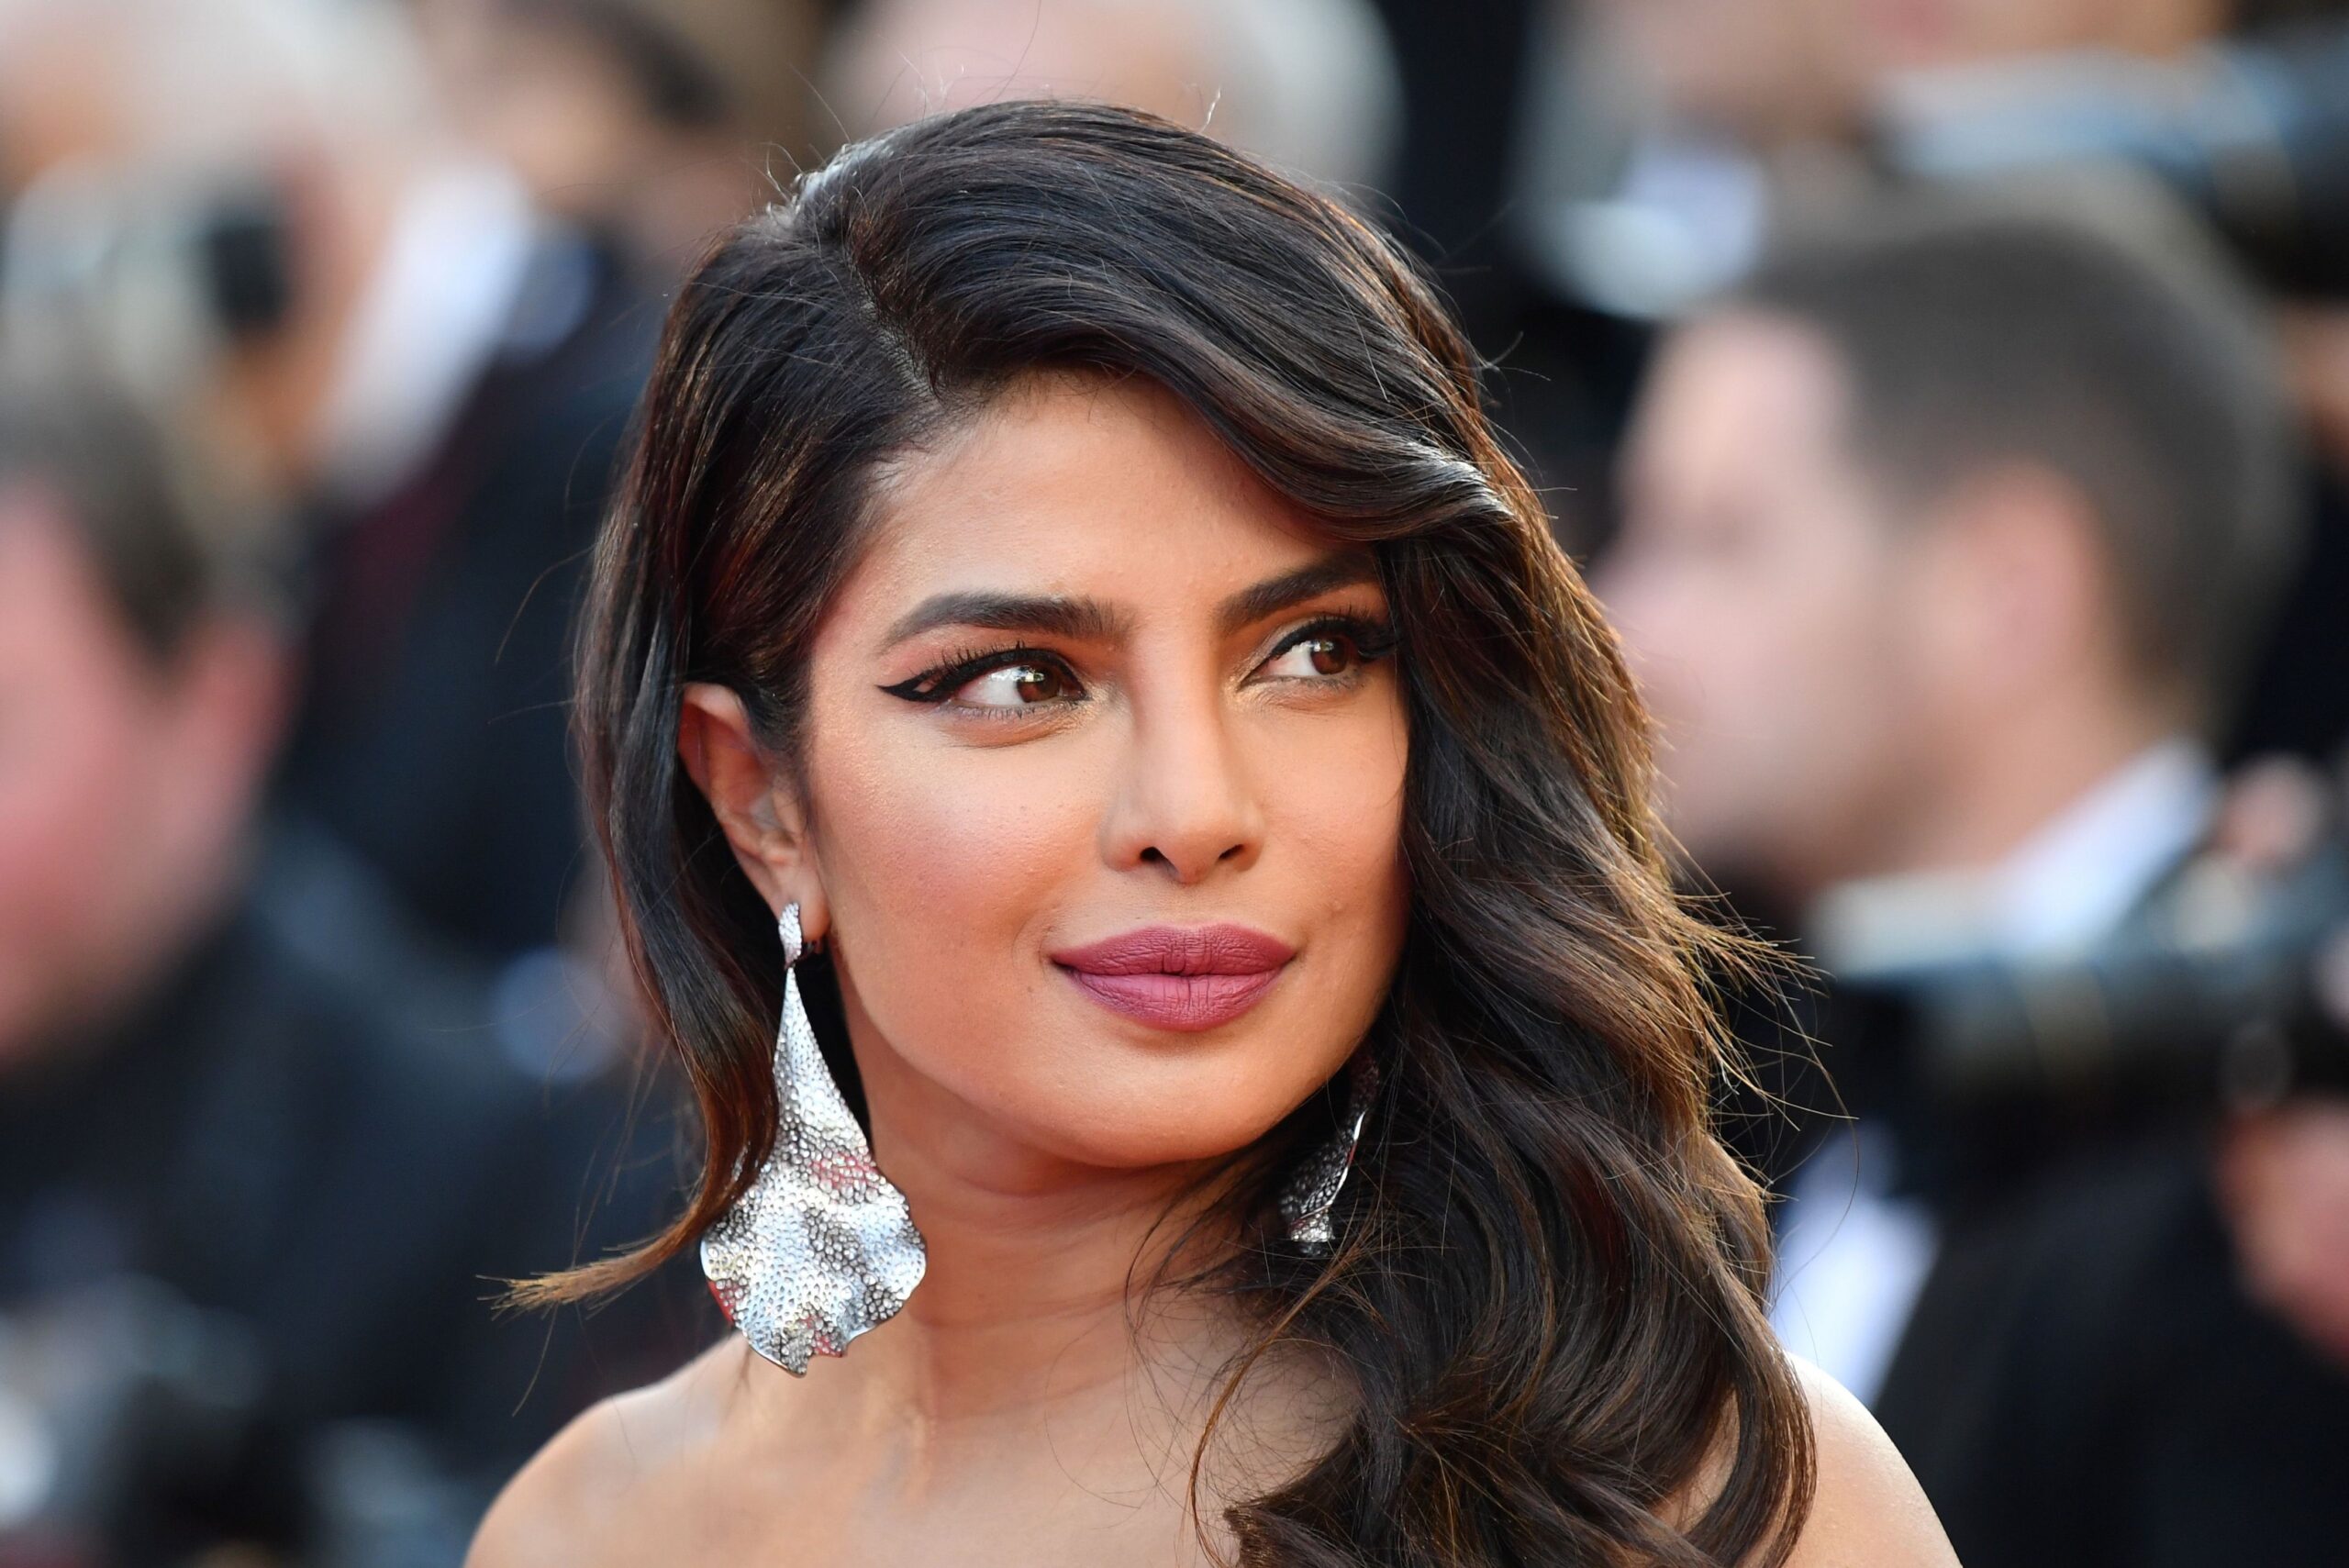 Priyanka Chopra quit a film after the director asked to see her underwear, calling it a dehumanizing moment.